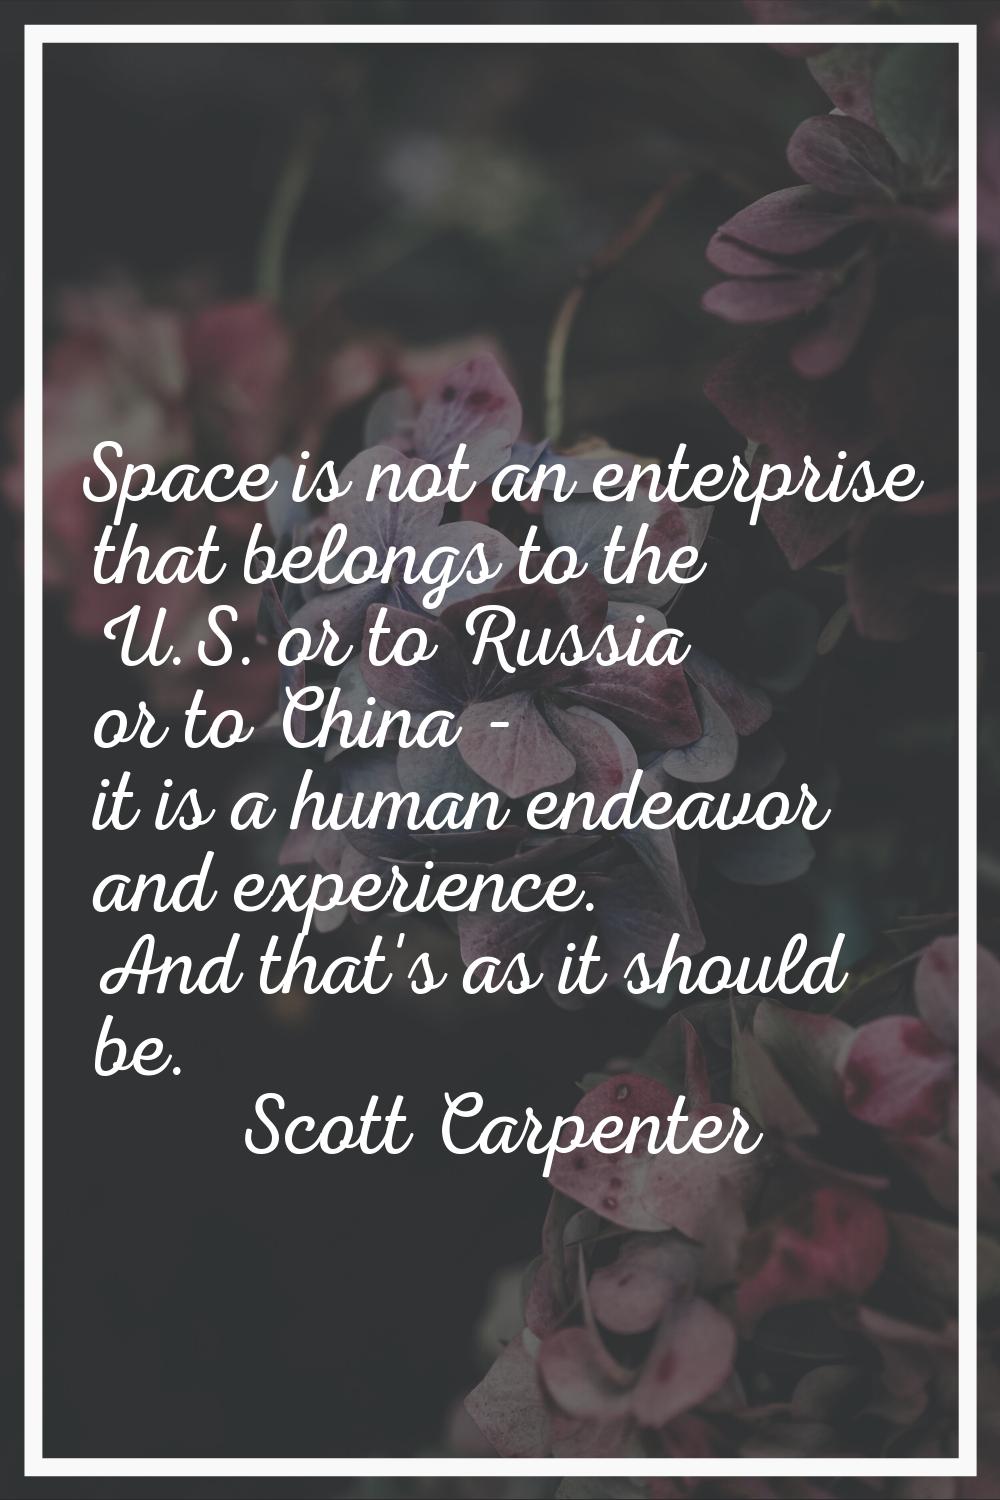 Space is not an enterprise that belongs to the U.S. or to Russia or to China - it is a human endeav